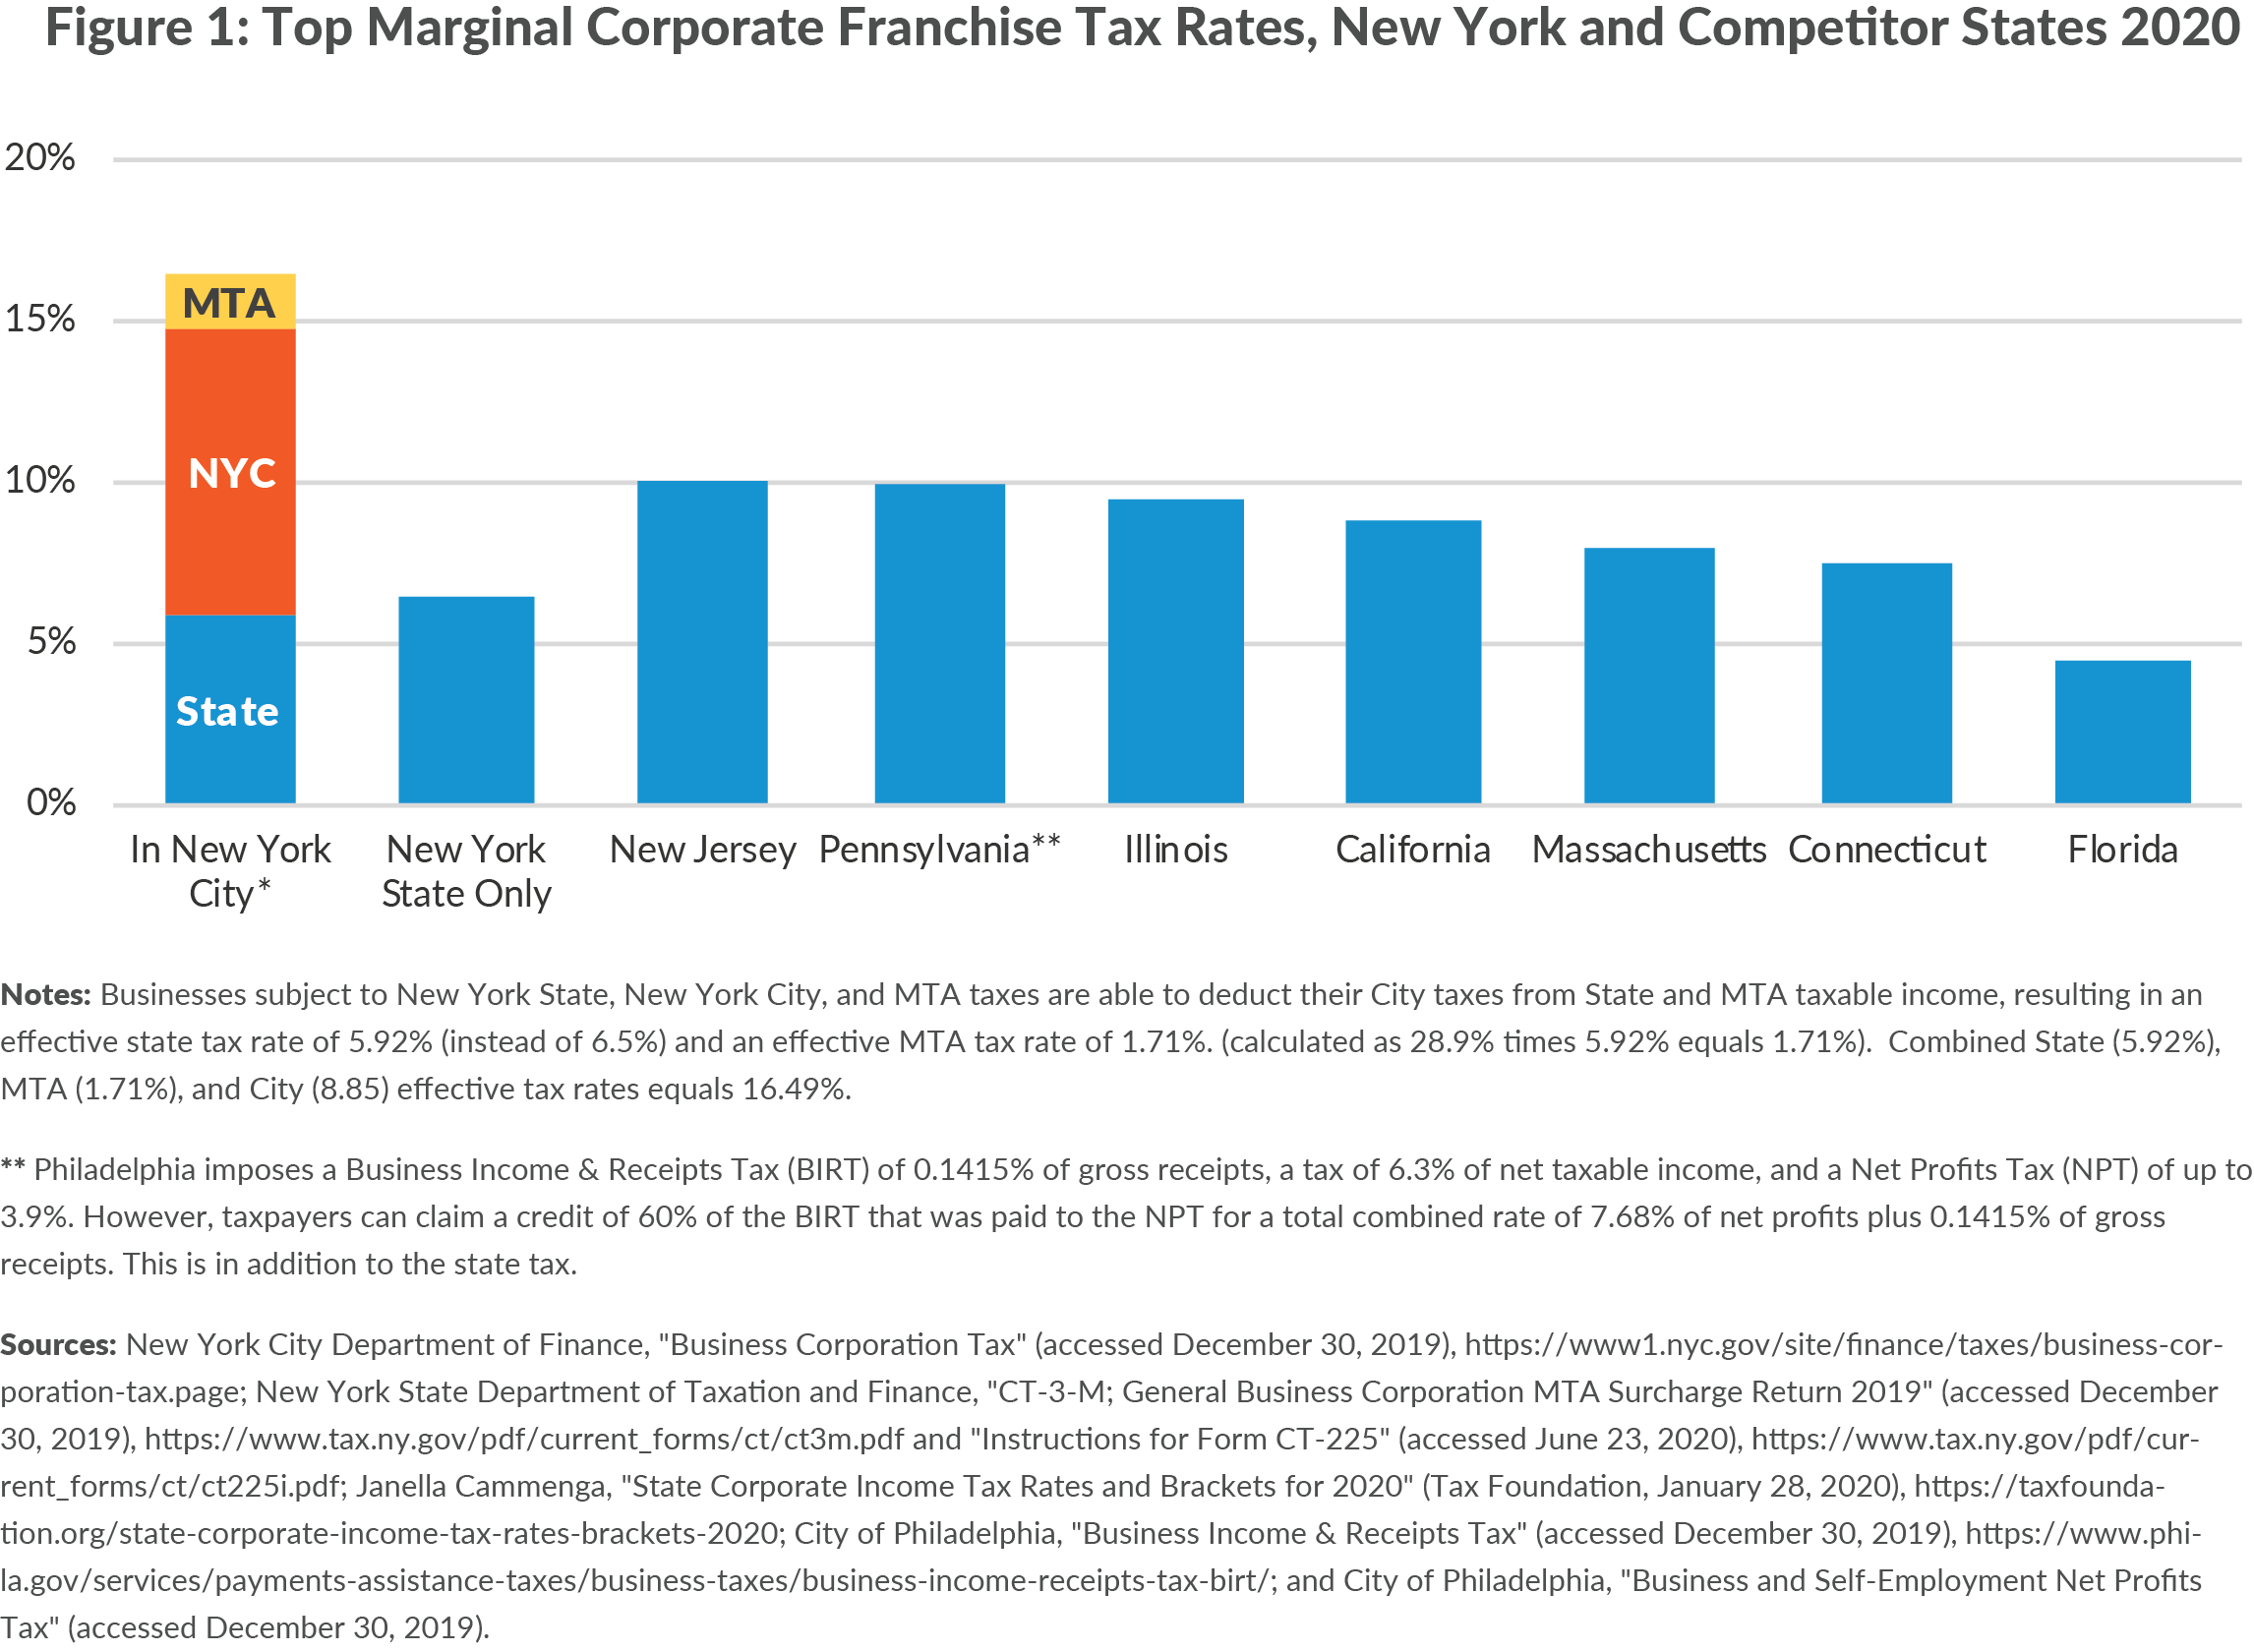 Figure 1: Top Marginal Corporate Franchise Tax Rates, New York and Competitor States 2020